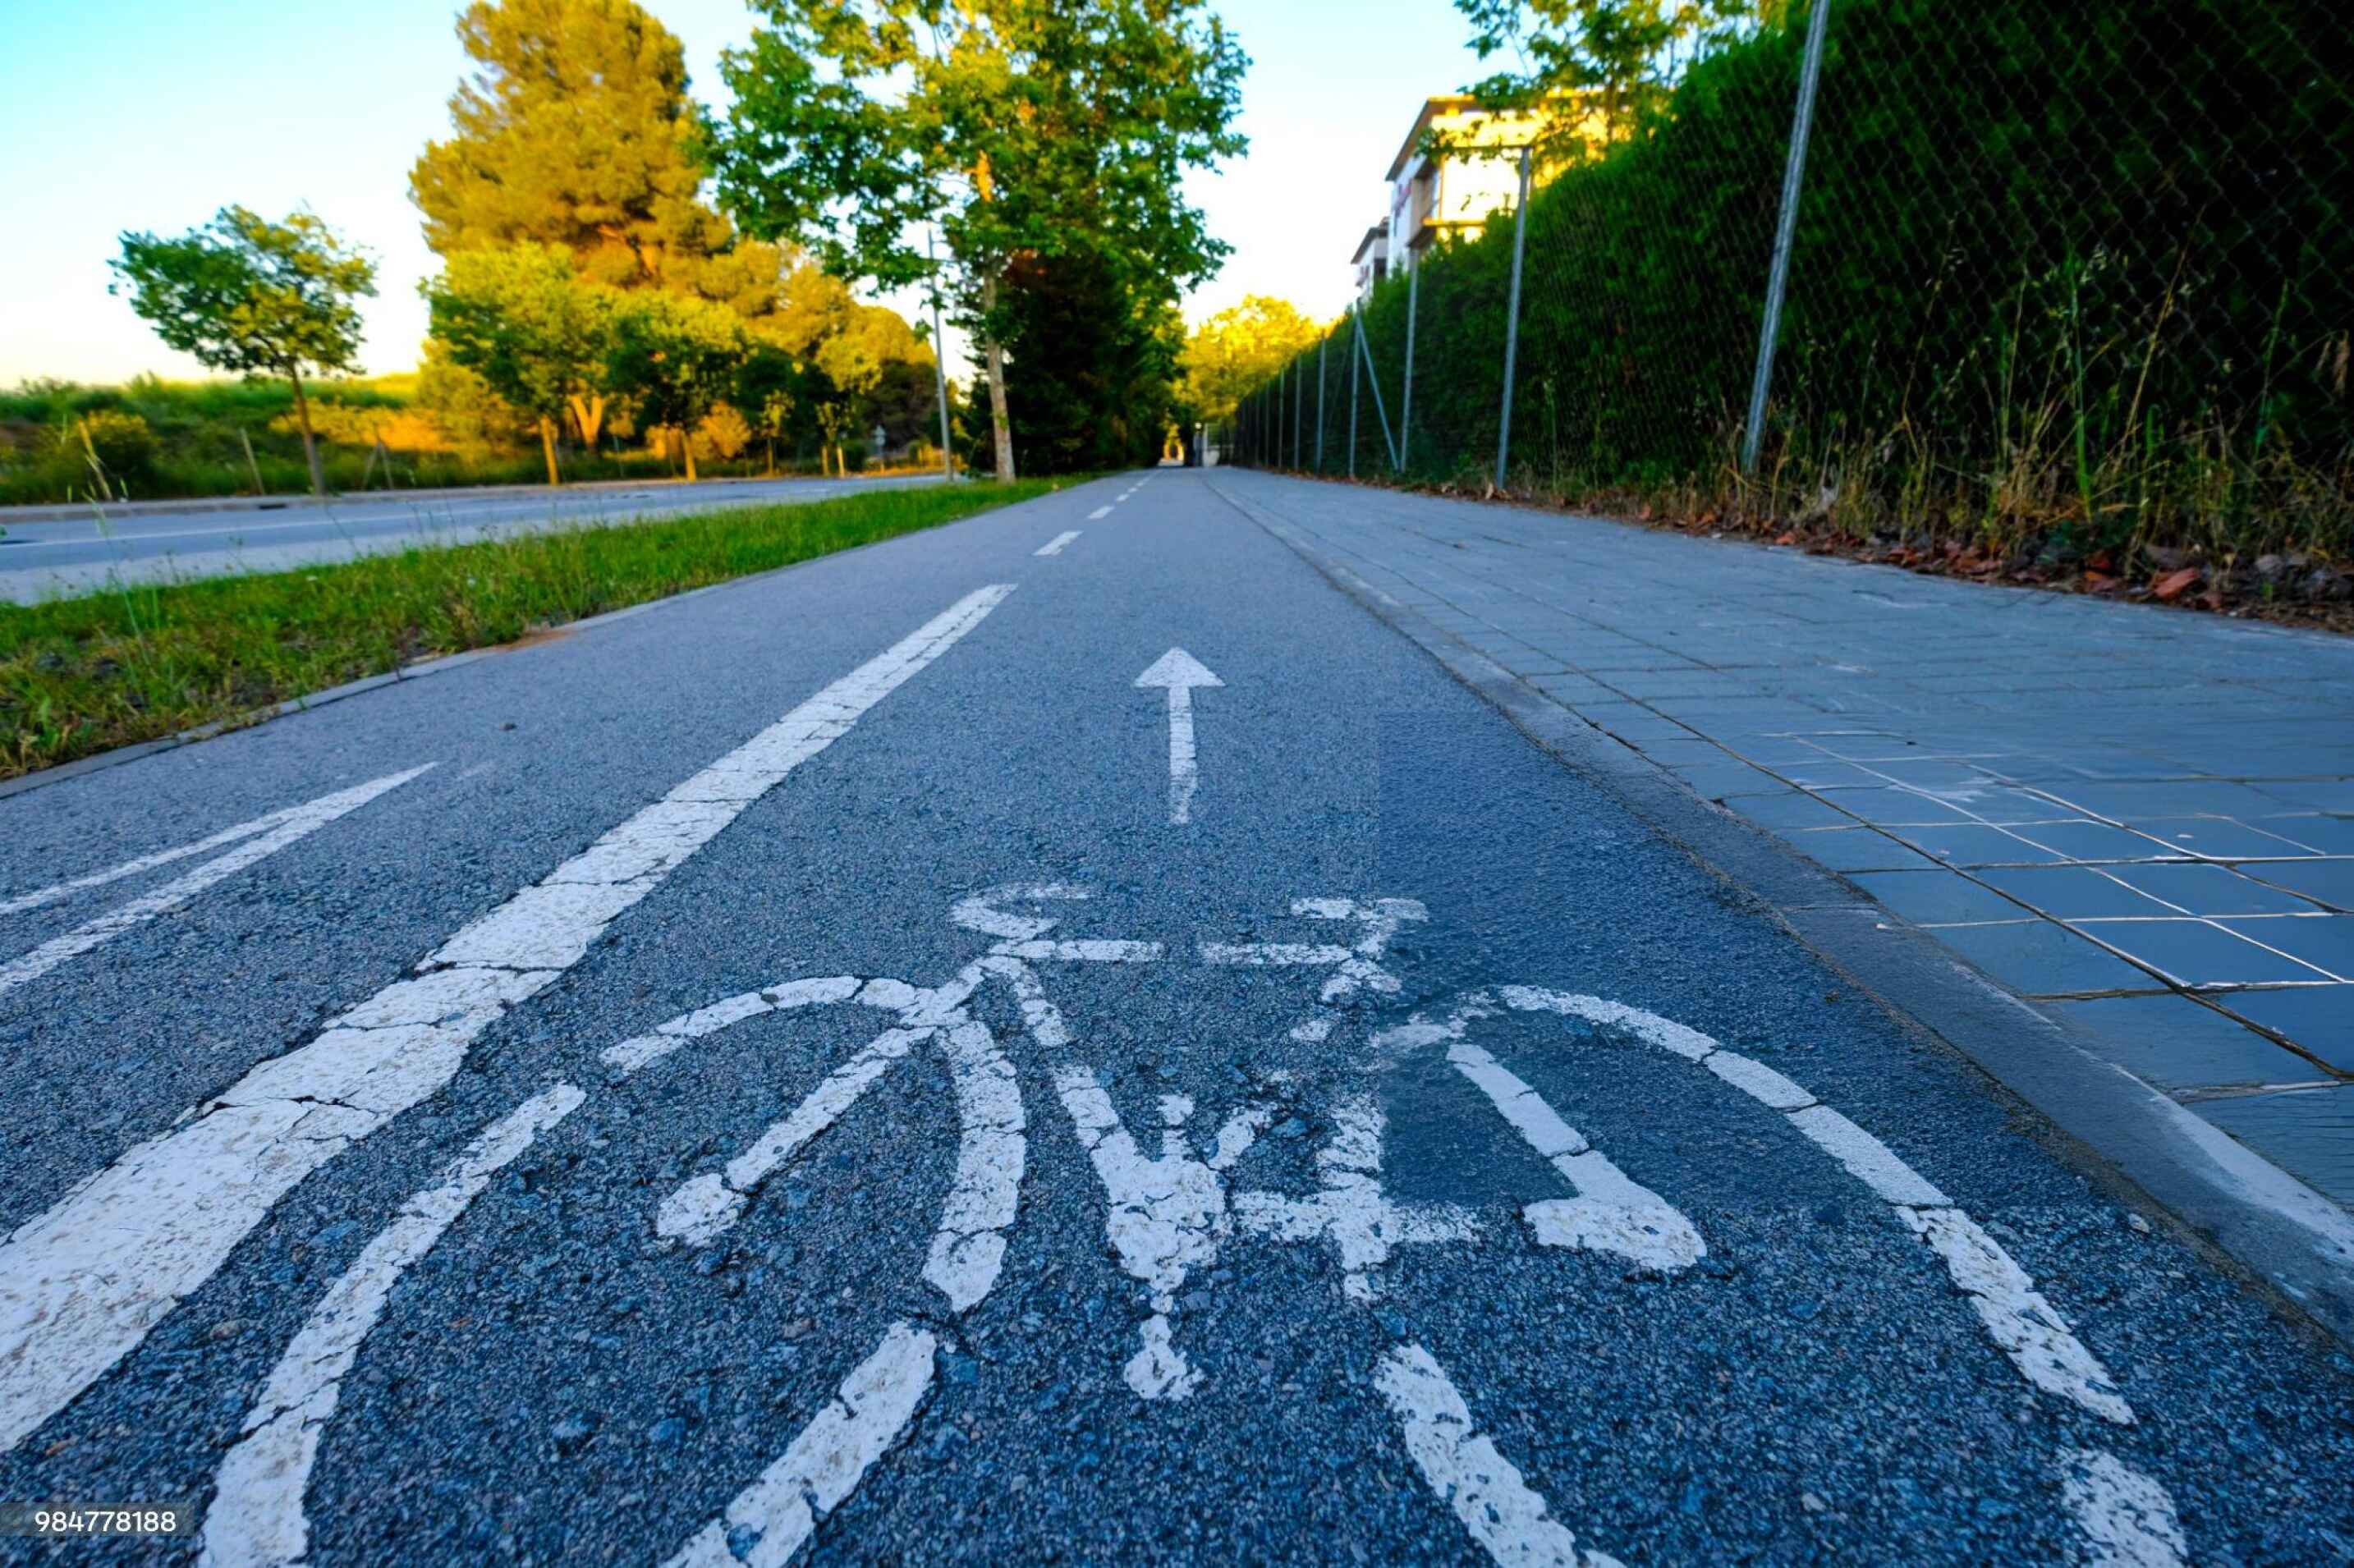 Road safety guidelines for bicycles